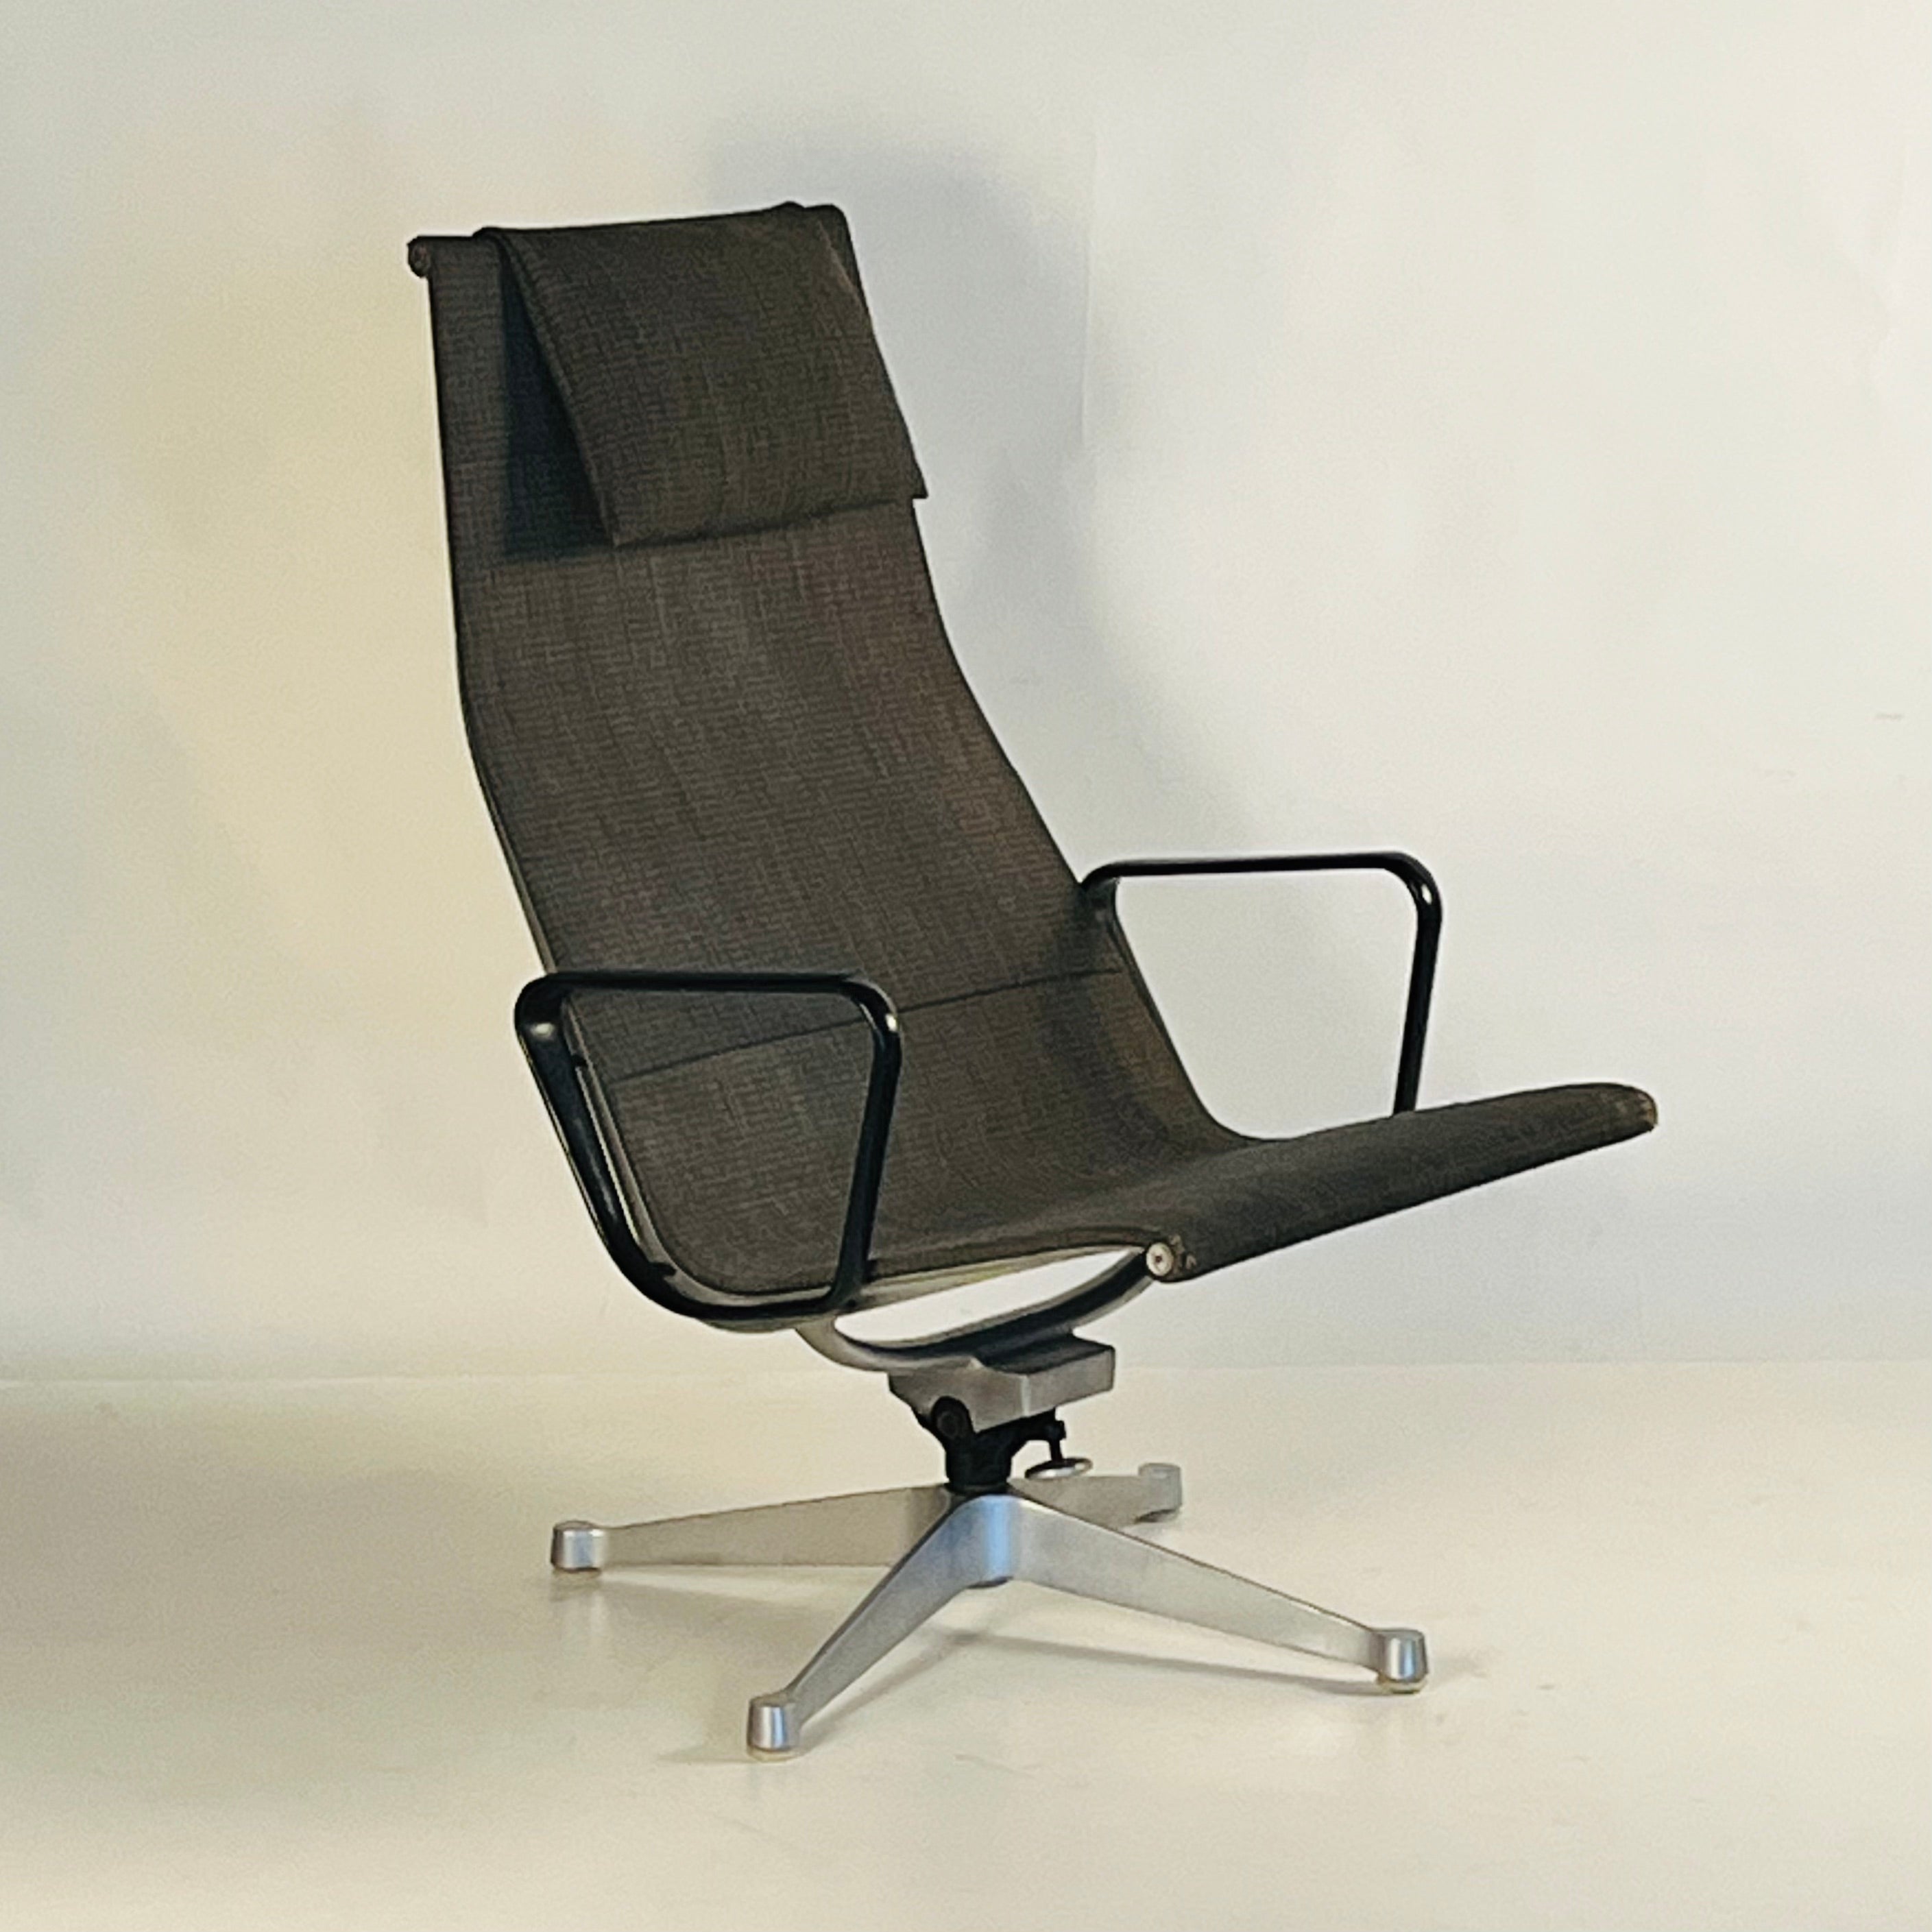 This is an early Alu Group Recliner Chair by Charles and Ray Eames for Herman Miller. Extremely cool and comfortable piece despite the wear.  We're selling this piece in its original condition. Comes with matching shearling hides for use